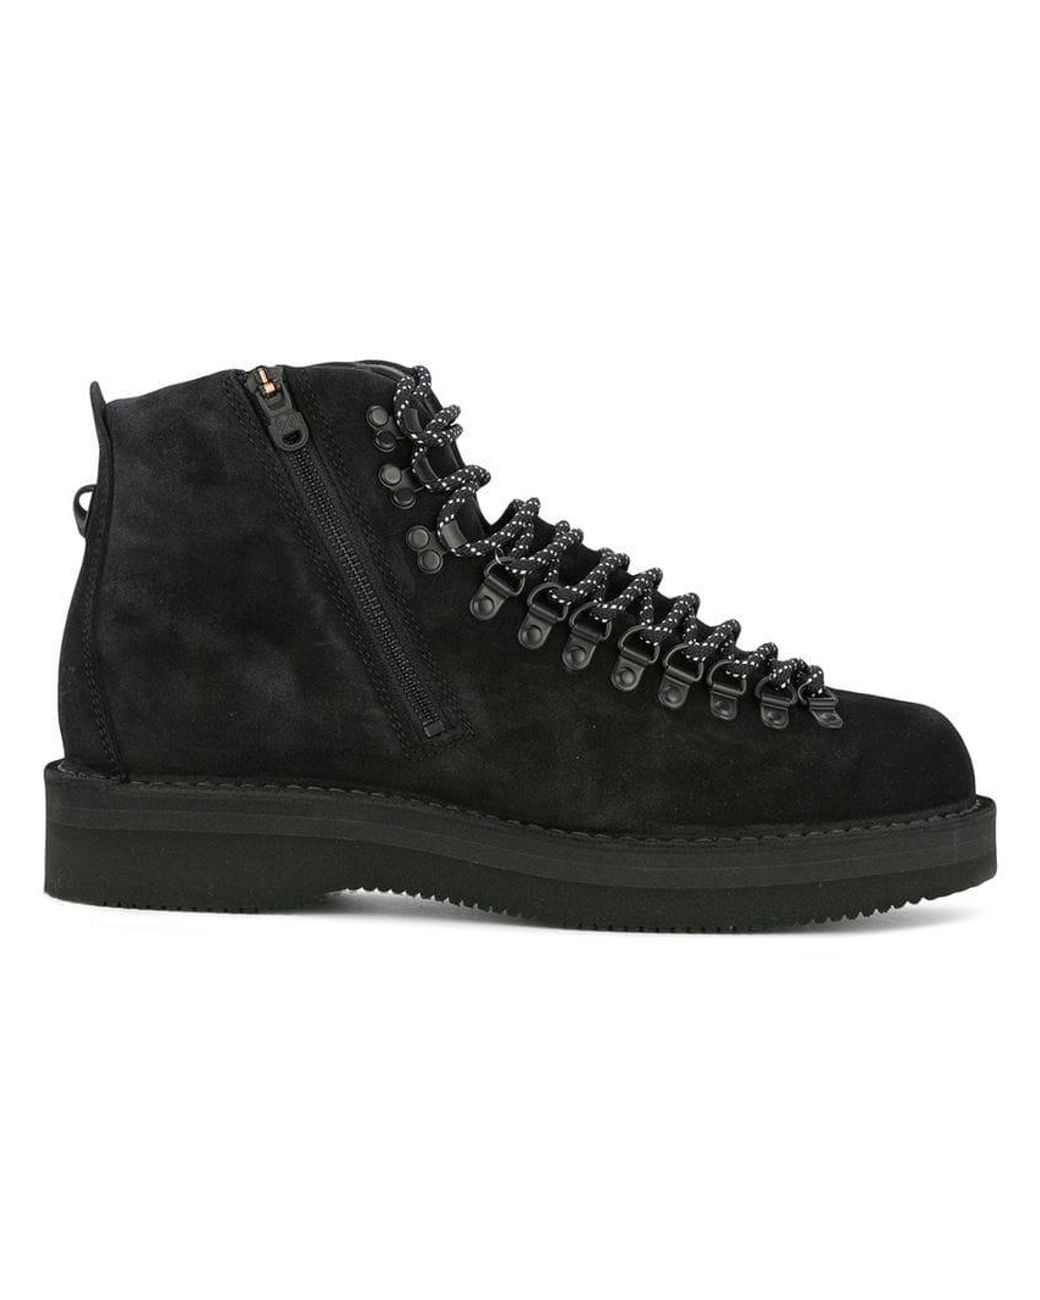 White Mountaineering Danner Boots in Black for Men | Lyst